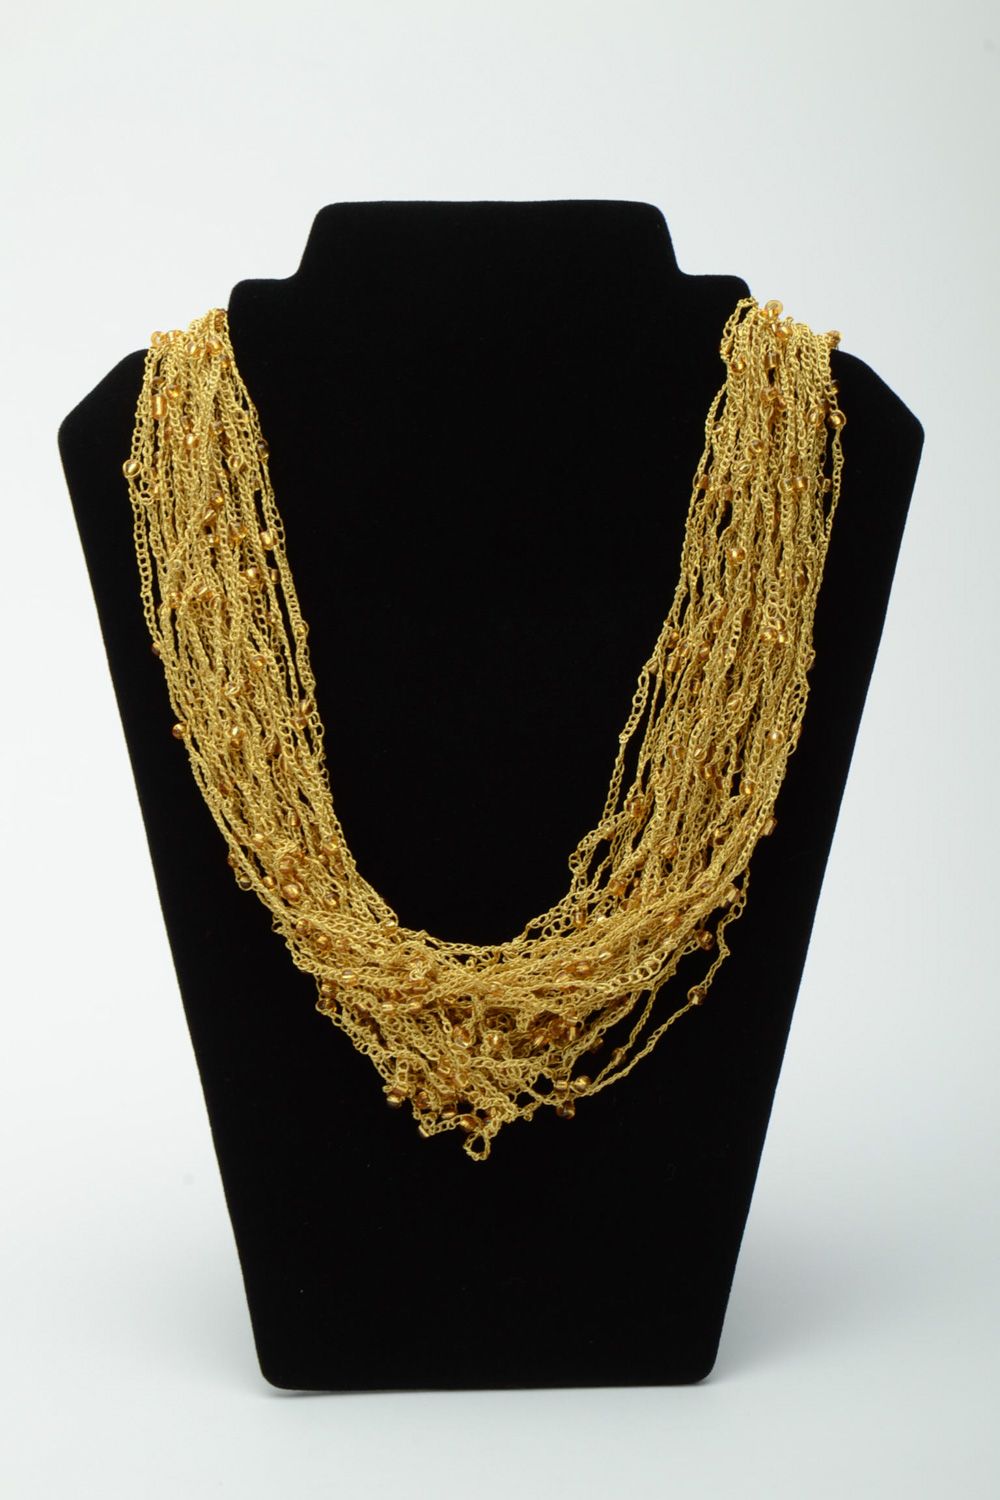 Homemade crochet necklace with beads photo 1